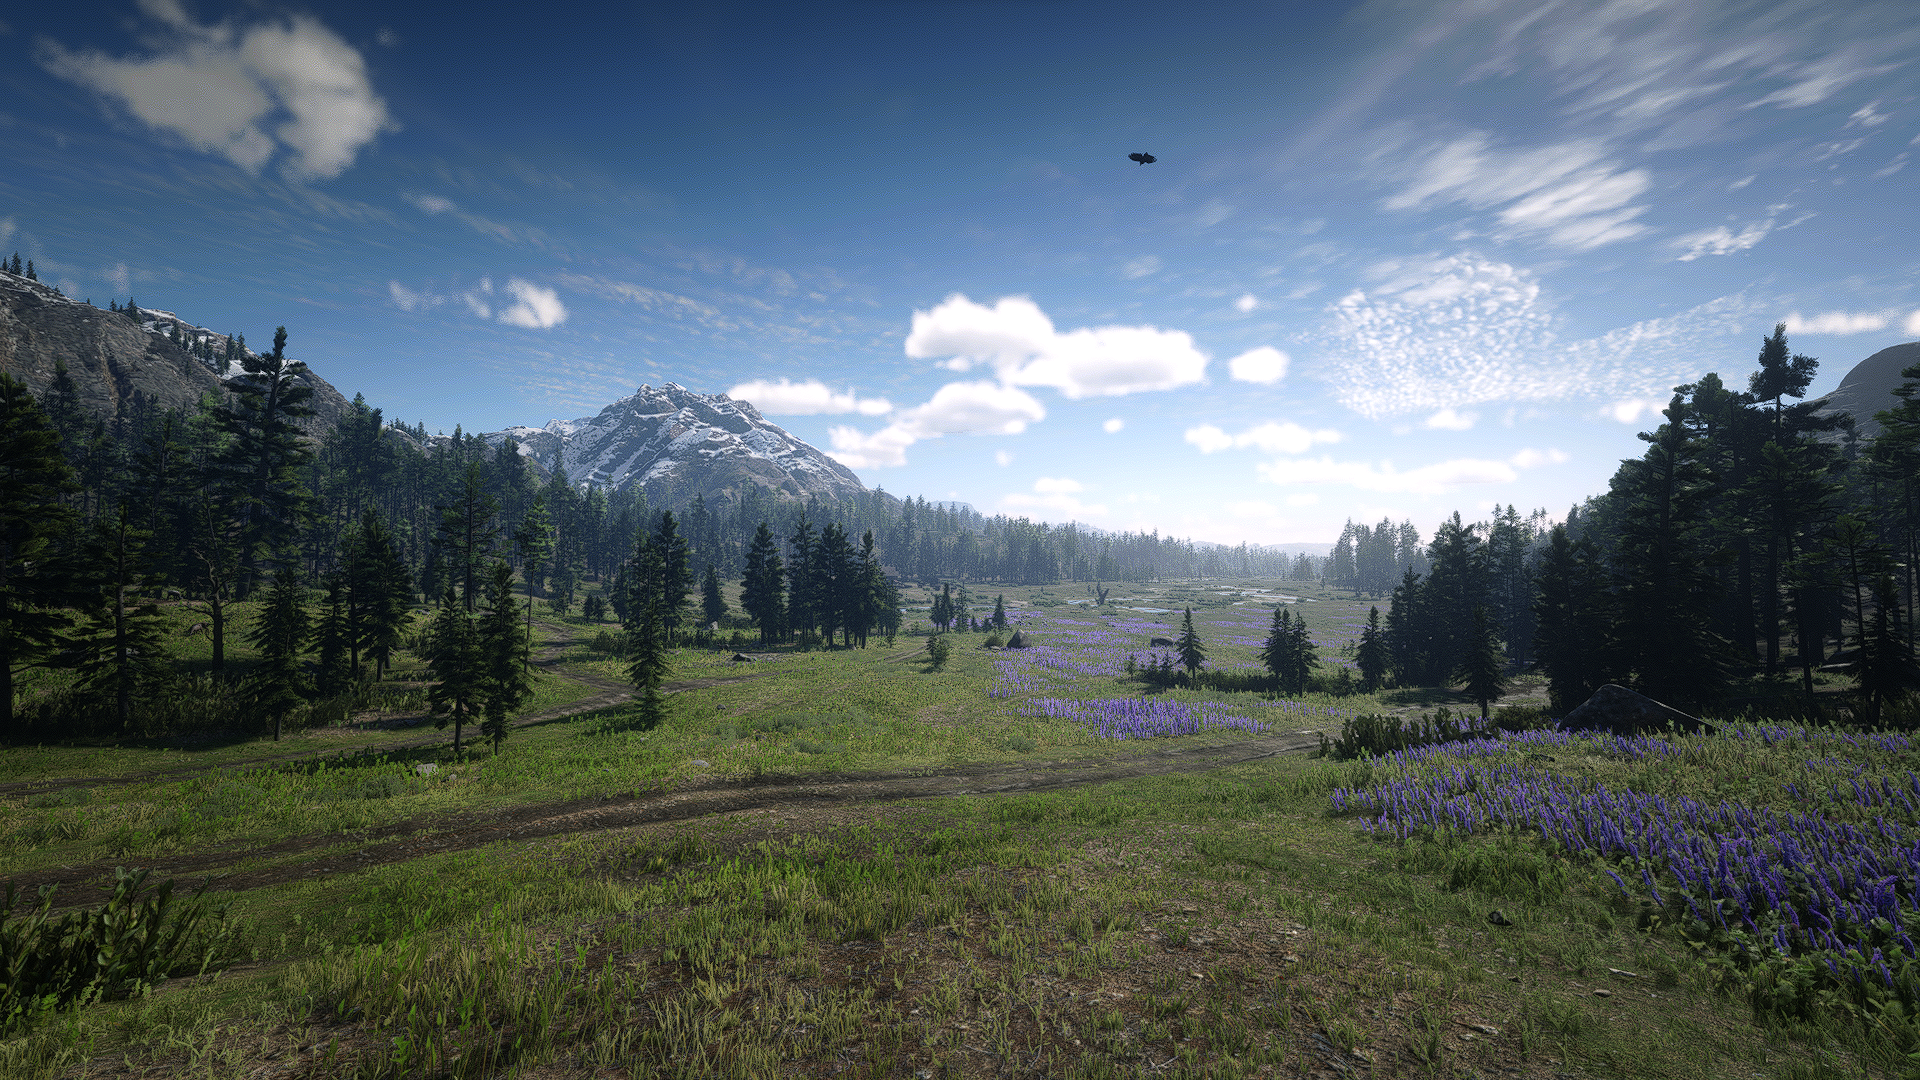 General 1920x1080 Red Dead Redemption 2 Red Dead Redemption nature trees hills mountains grass clouds screen shot PC gaming video games flowers landscape